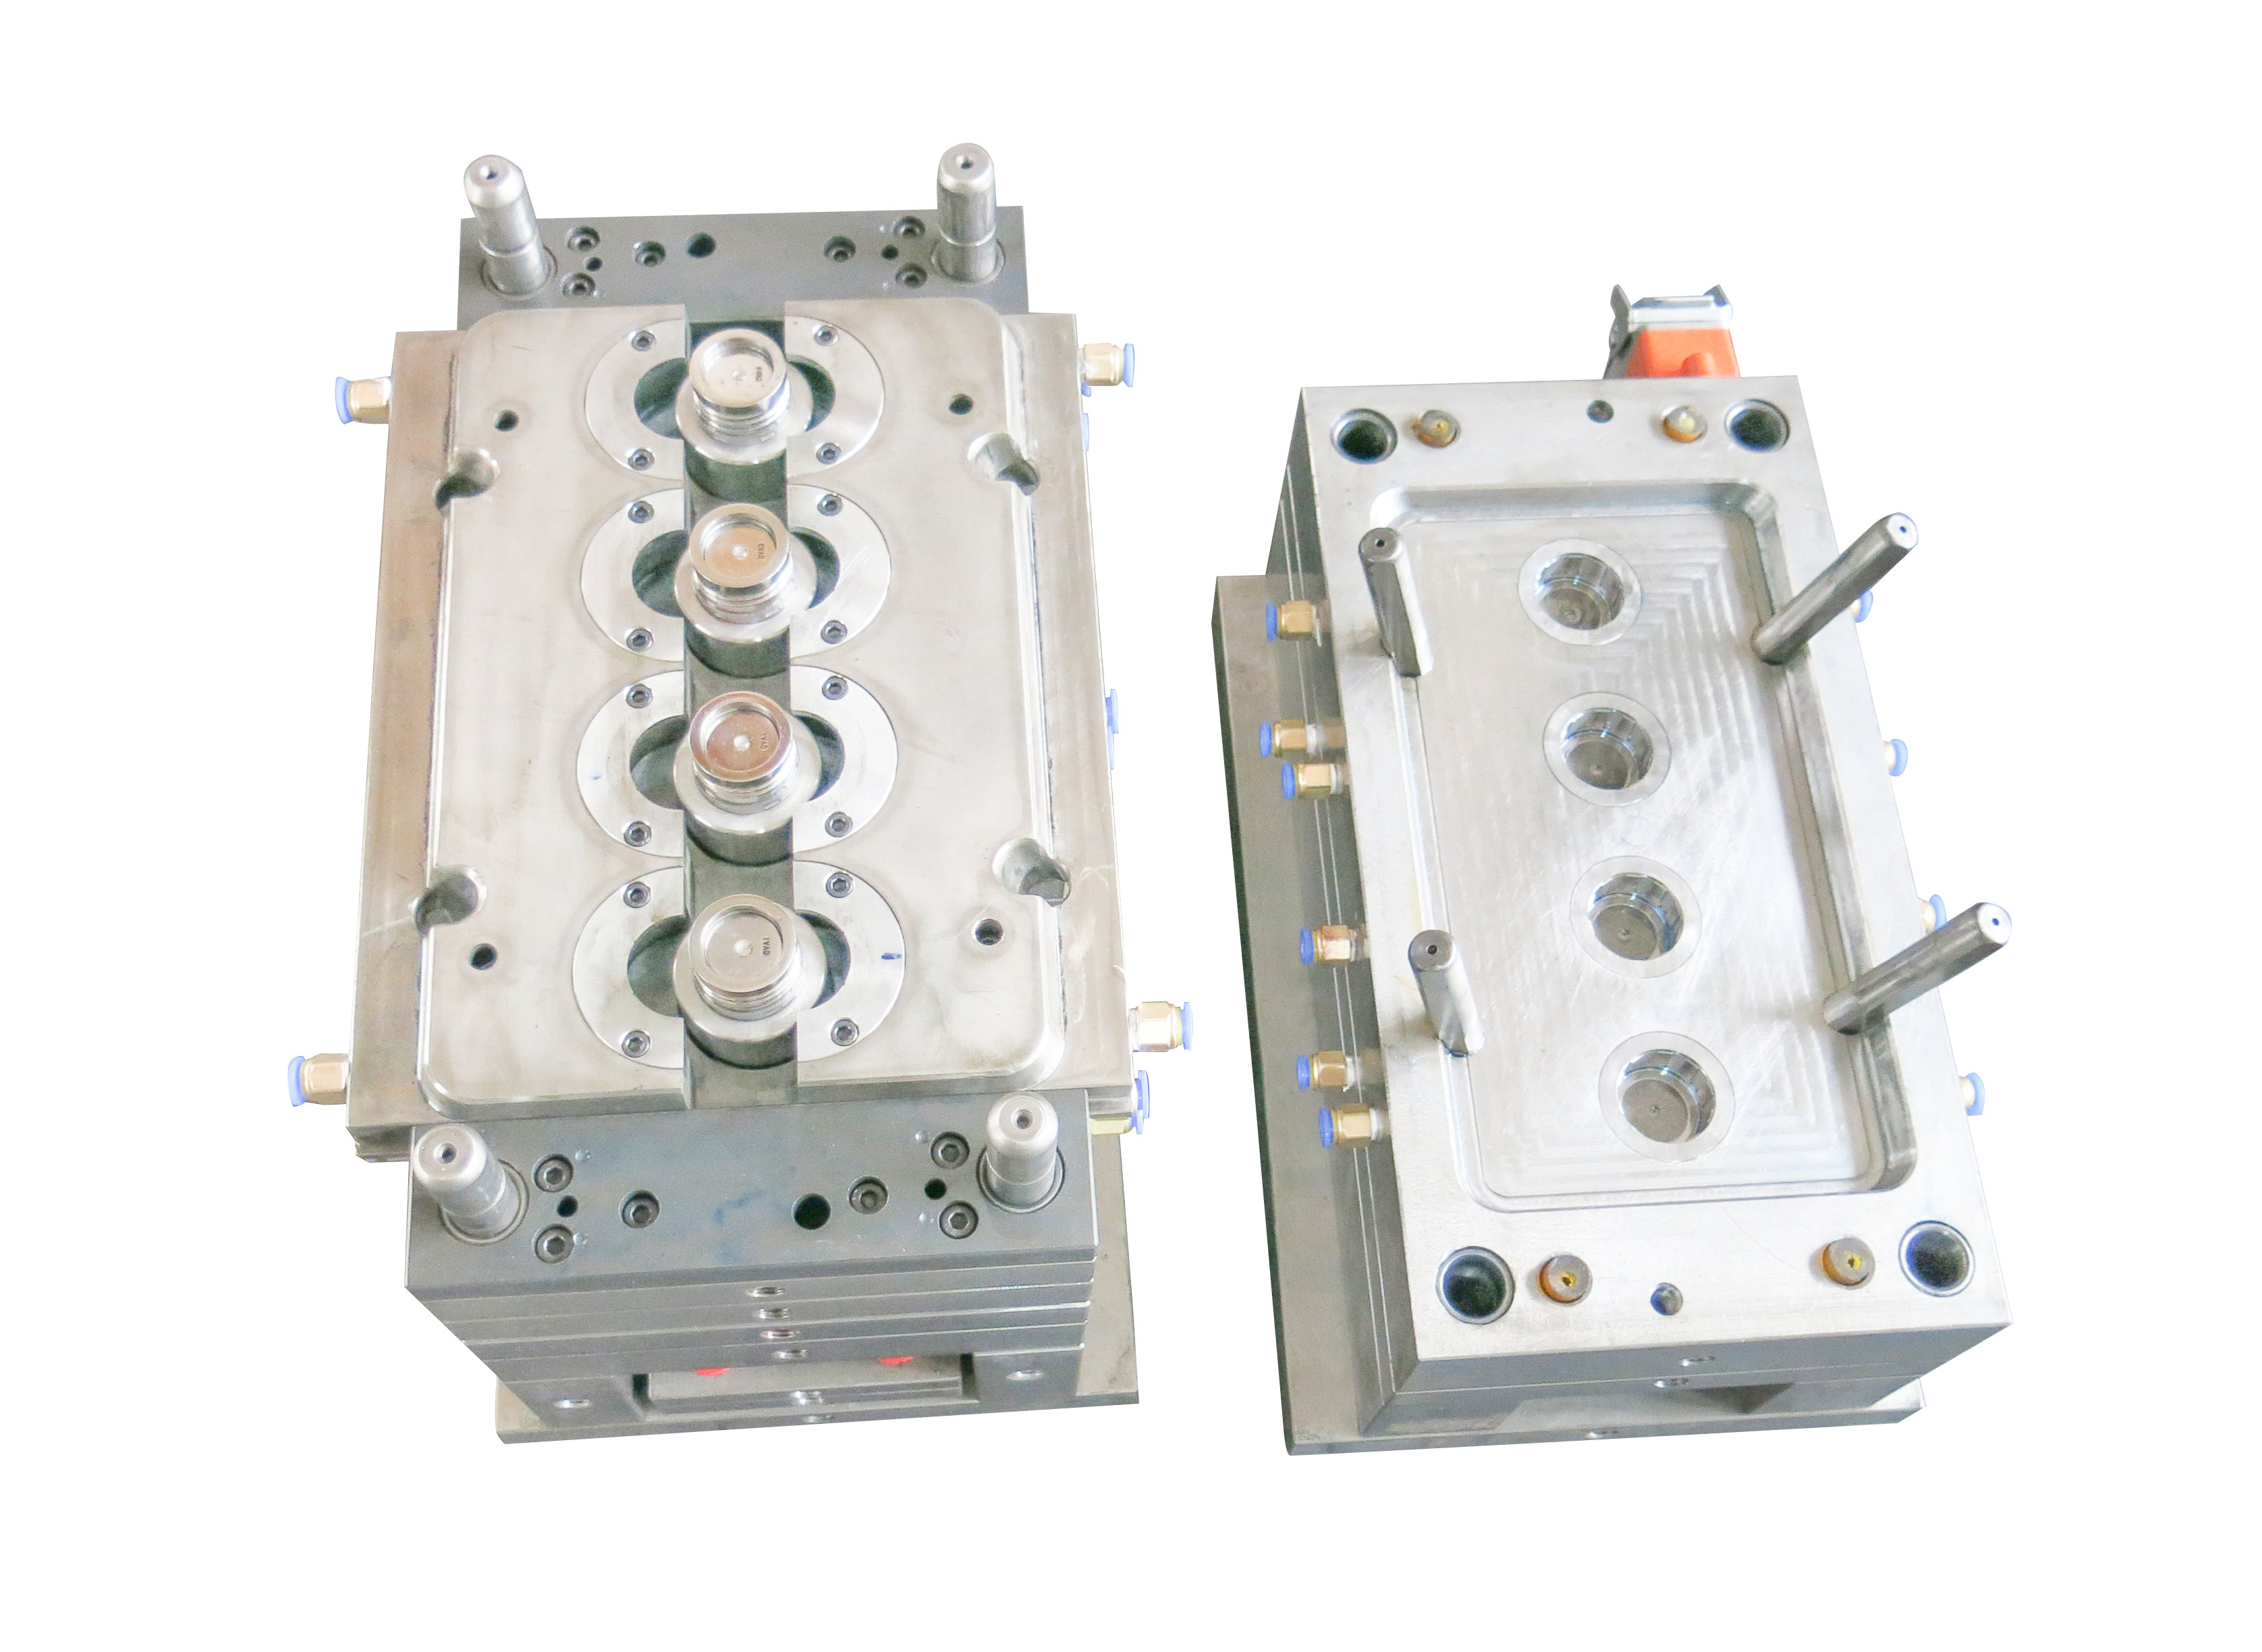 How to choose a standard mold base for an injection mold processing plant to reduce processing time